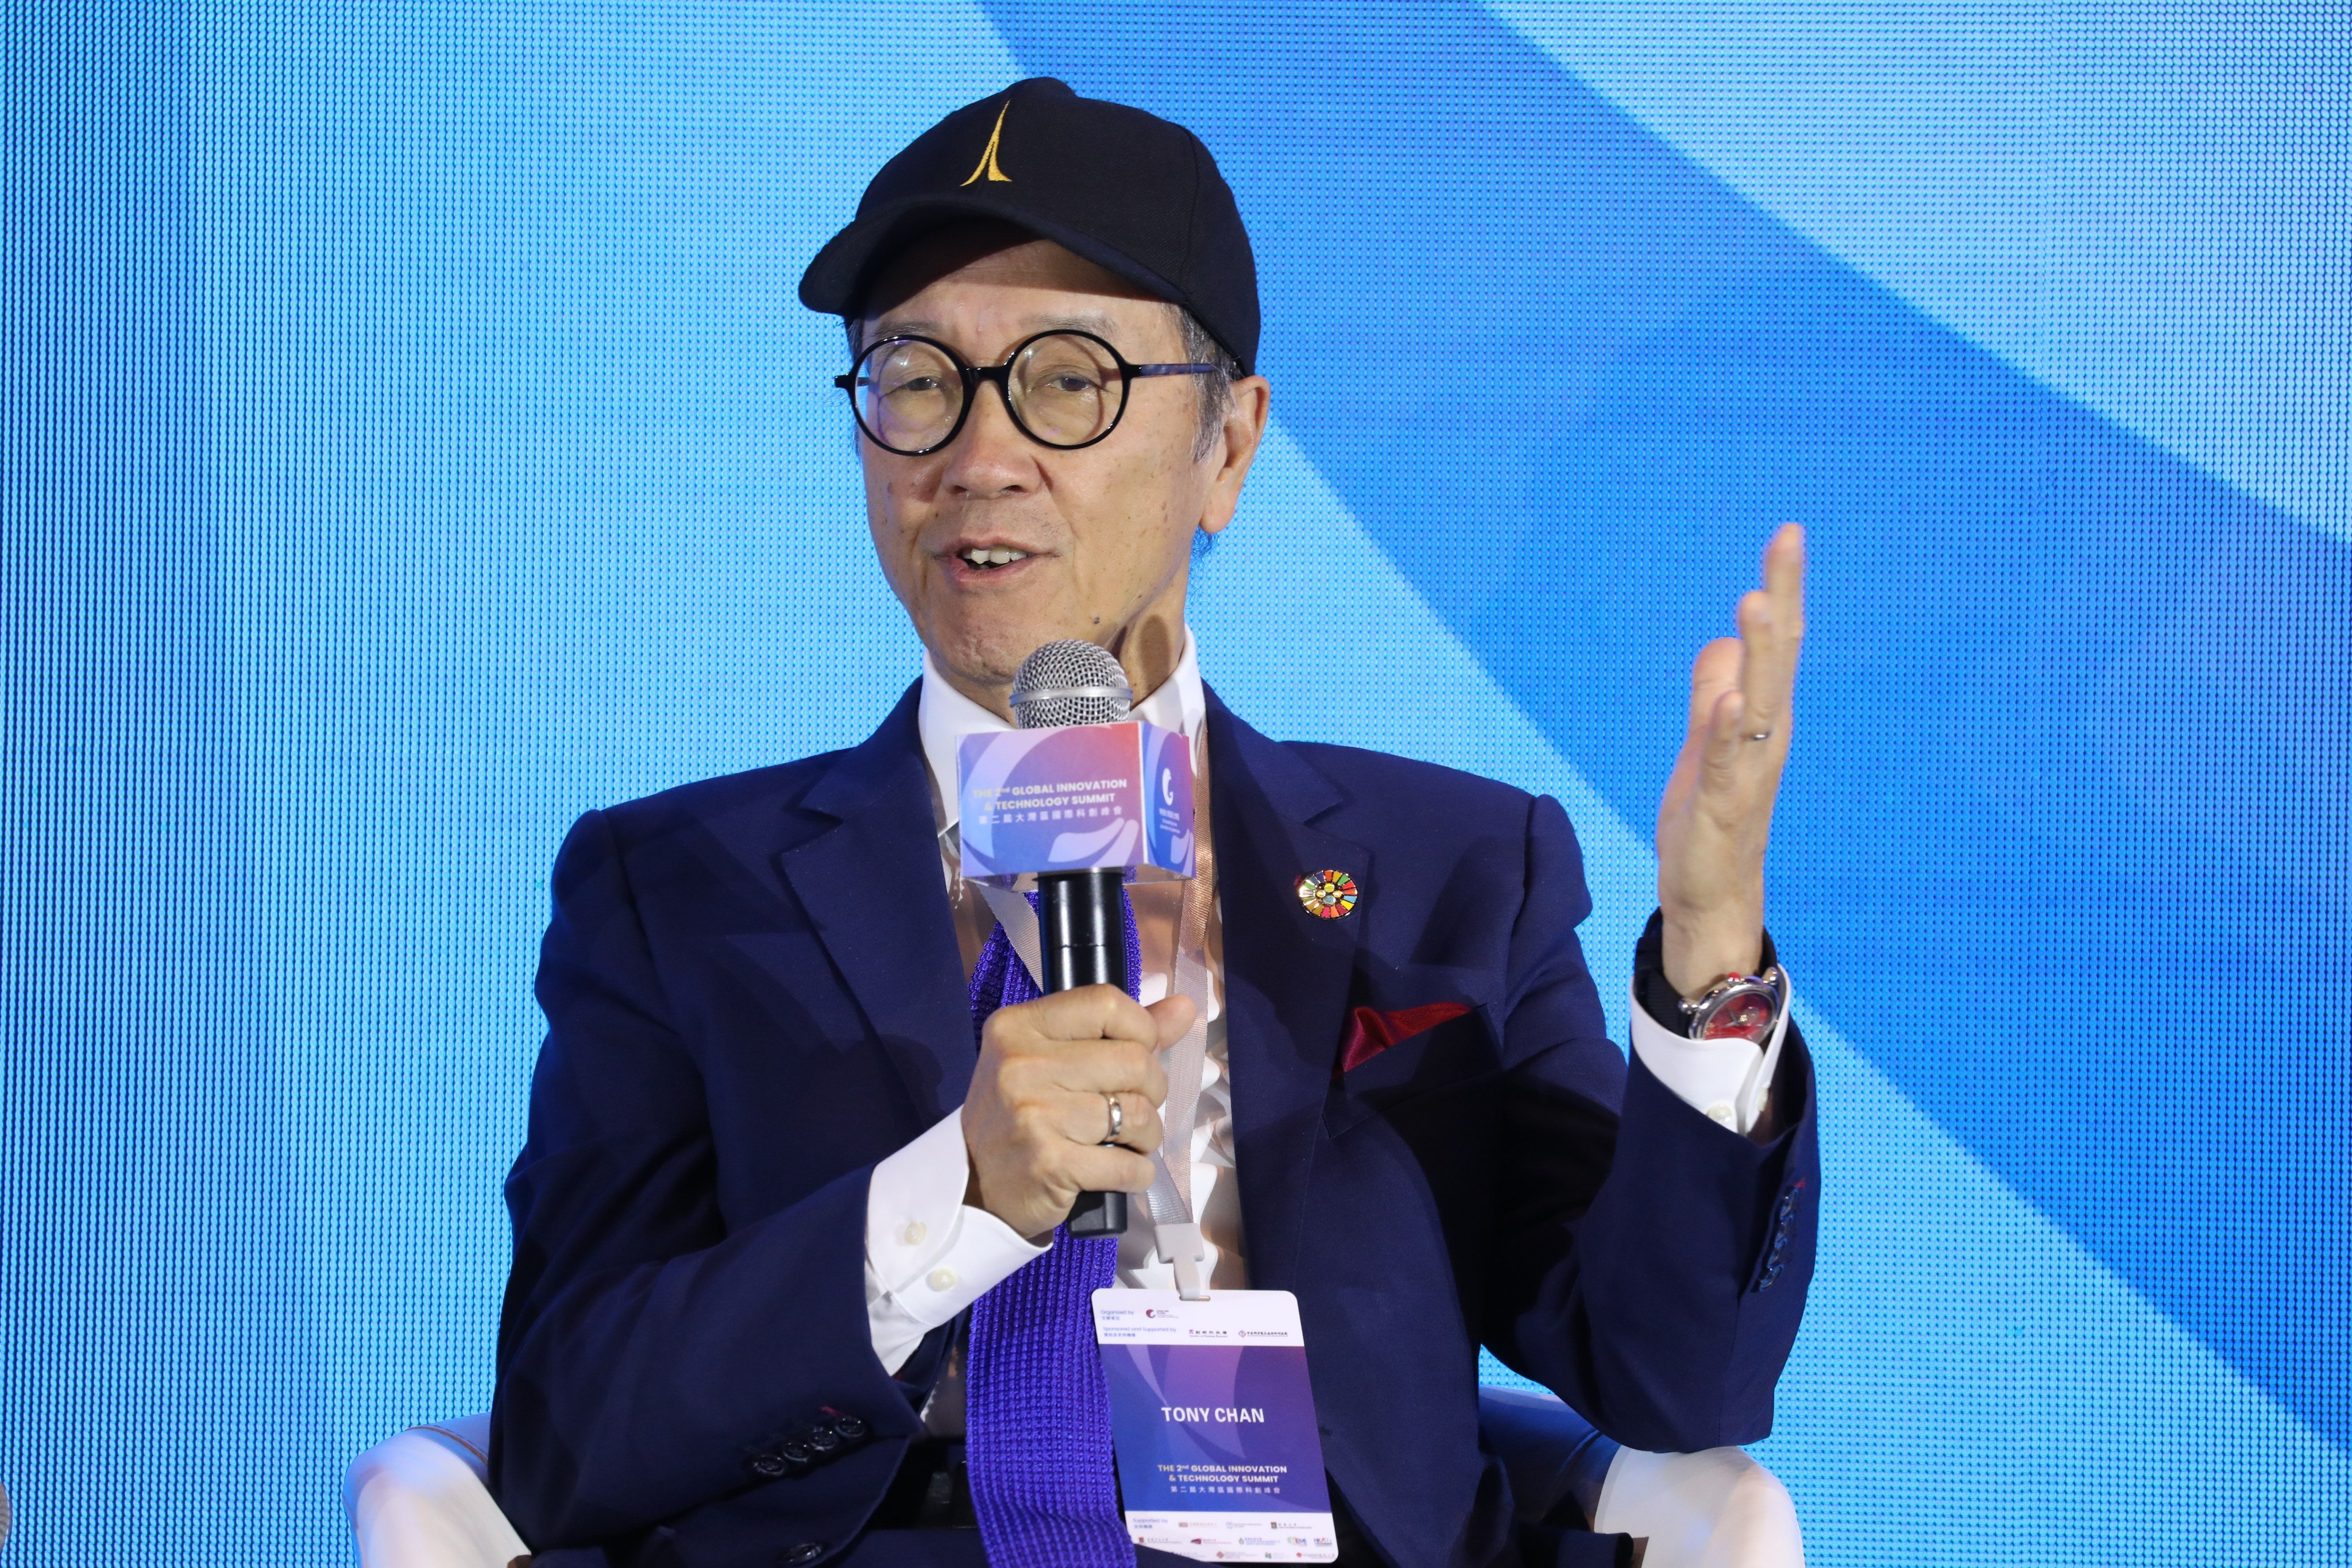 Tony Chan, the president of Saudi Arabia’s King Abdullah University of Science and Technology, tells an international I&T summit in Hong Kong that the Greater Bay Area is crucial to development in the sector.
Photo: Sun Yeung